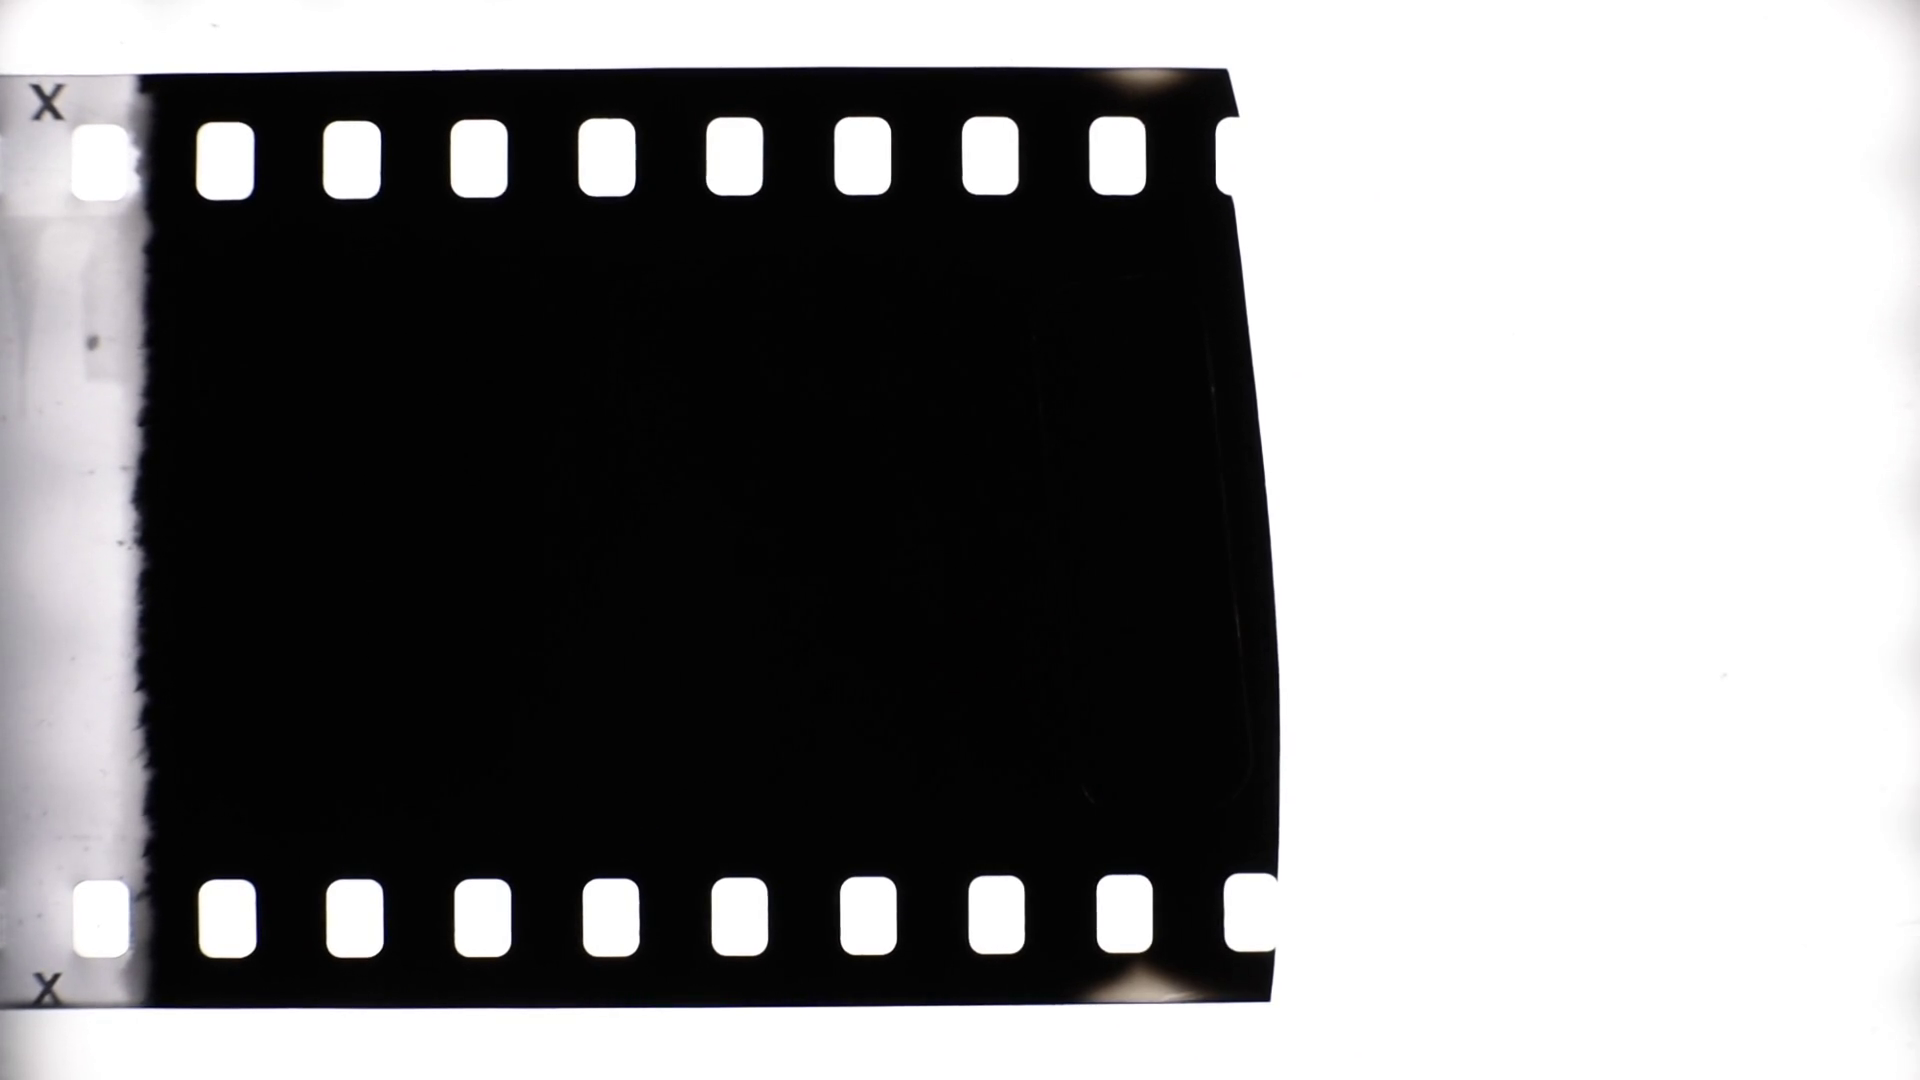 Backlight viewer and black and white negative photographic film roll ...